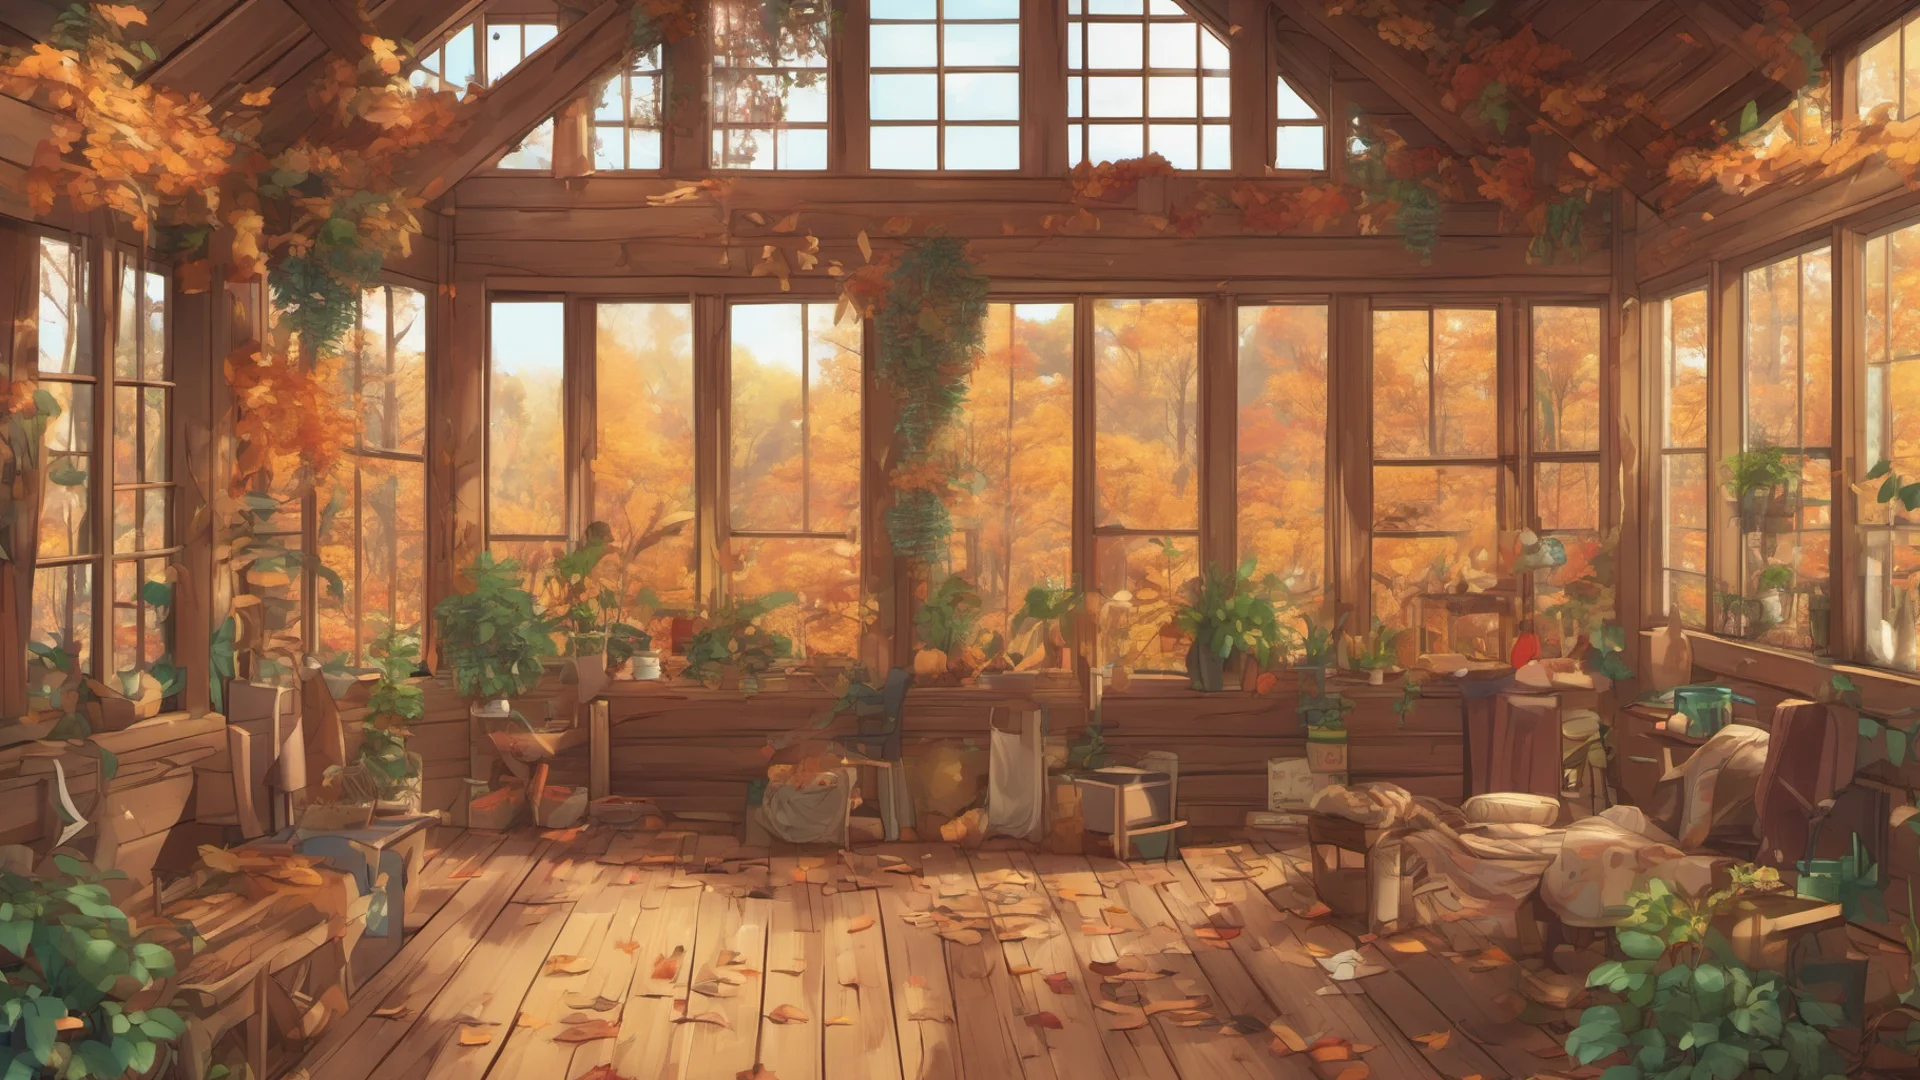 aianime style log cabin interior with many plants and large windows looking into an autumn forest amazing awesome portrait 2 wide